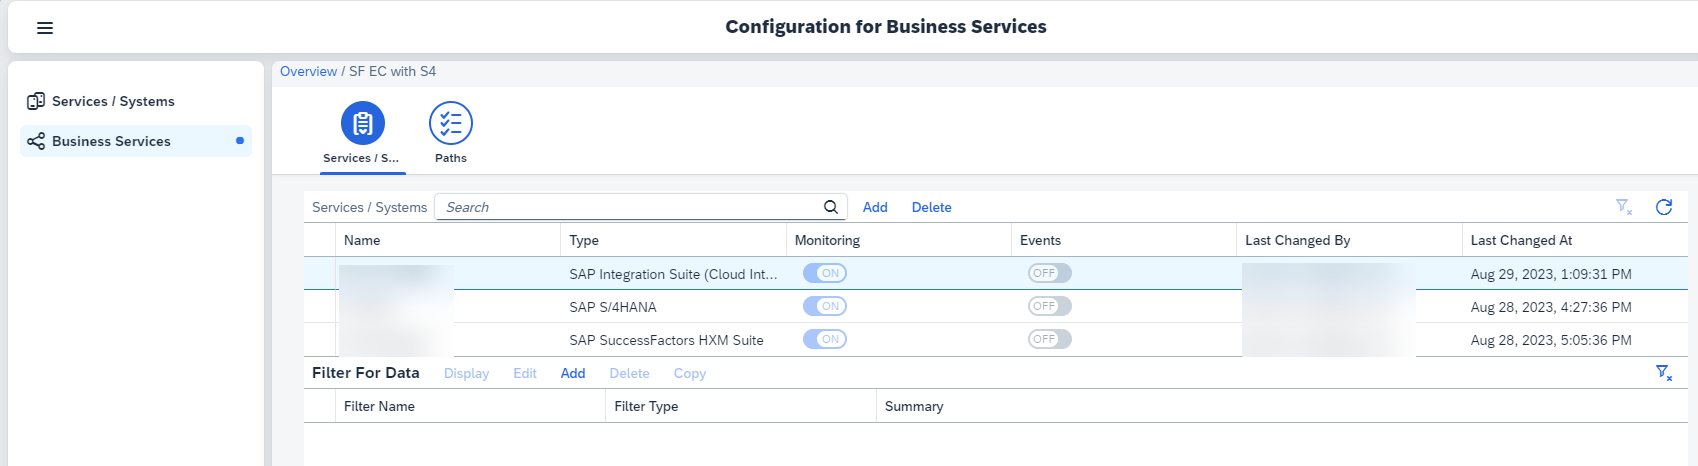 Configuration%20for%20Business%20Service